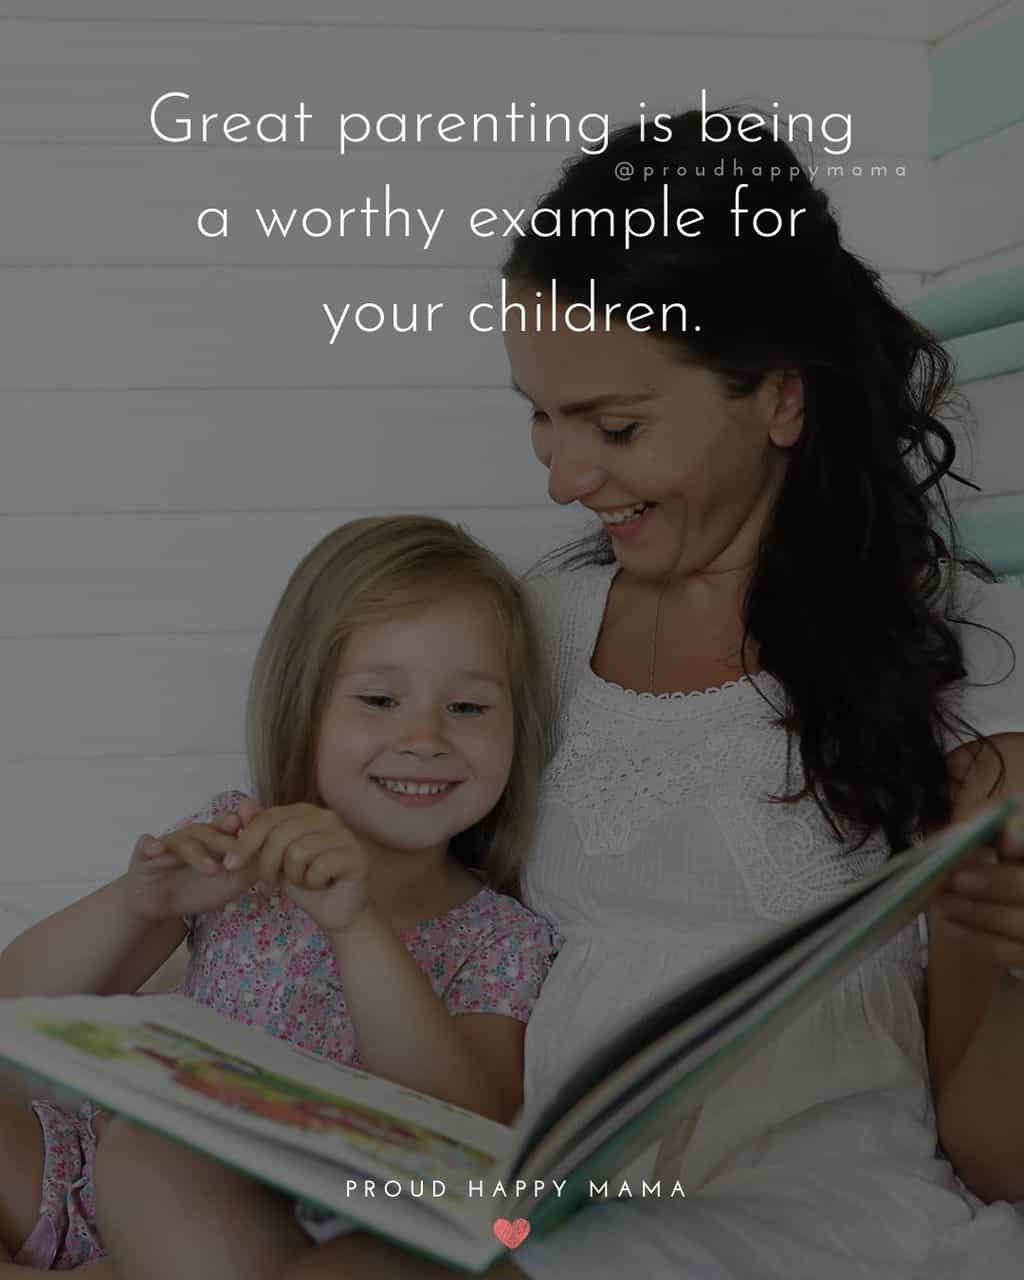 Parenting Quotes - Great parenting is being a worthy example for your children.’